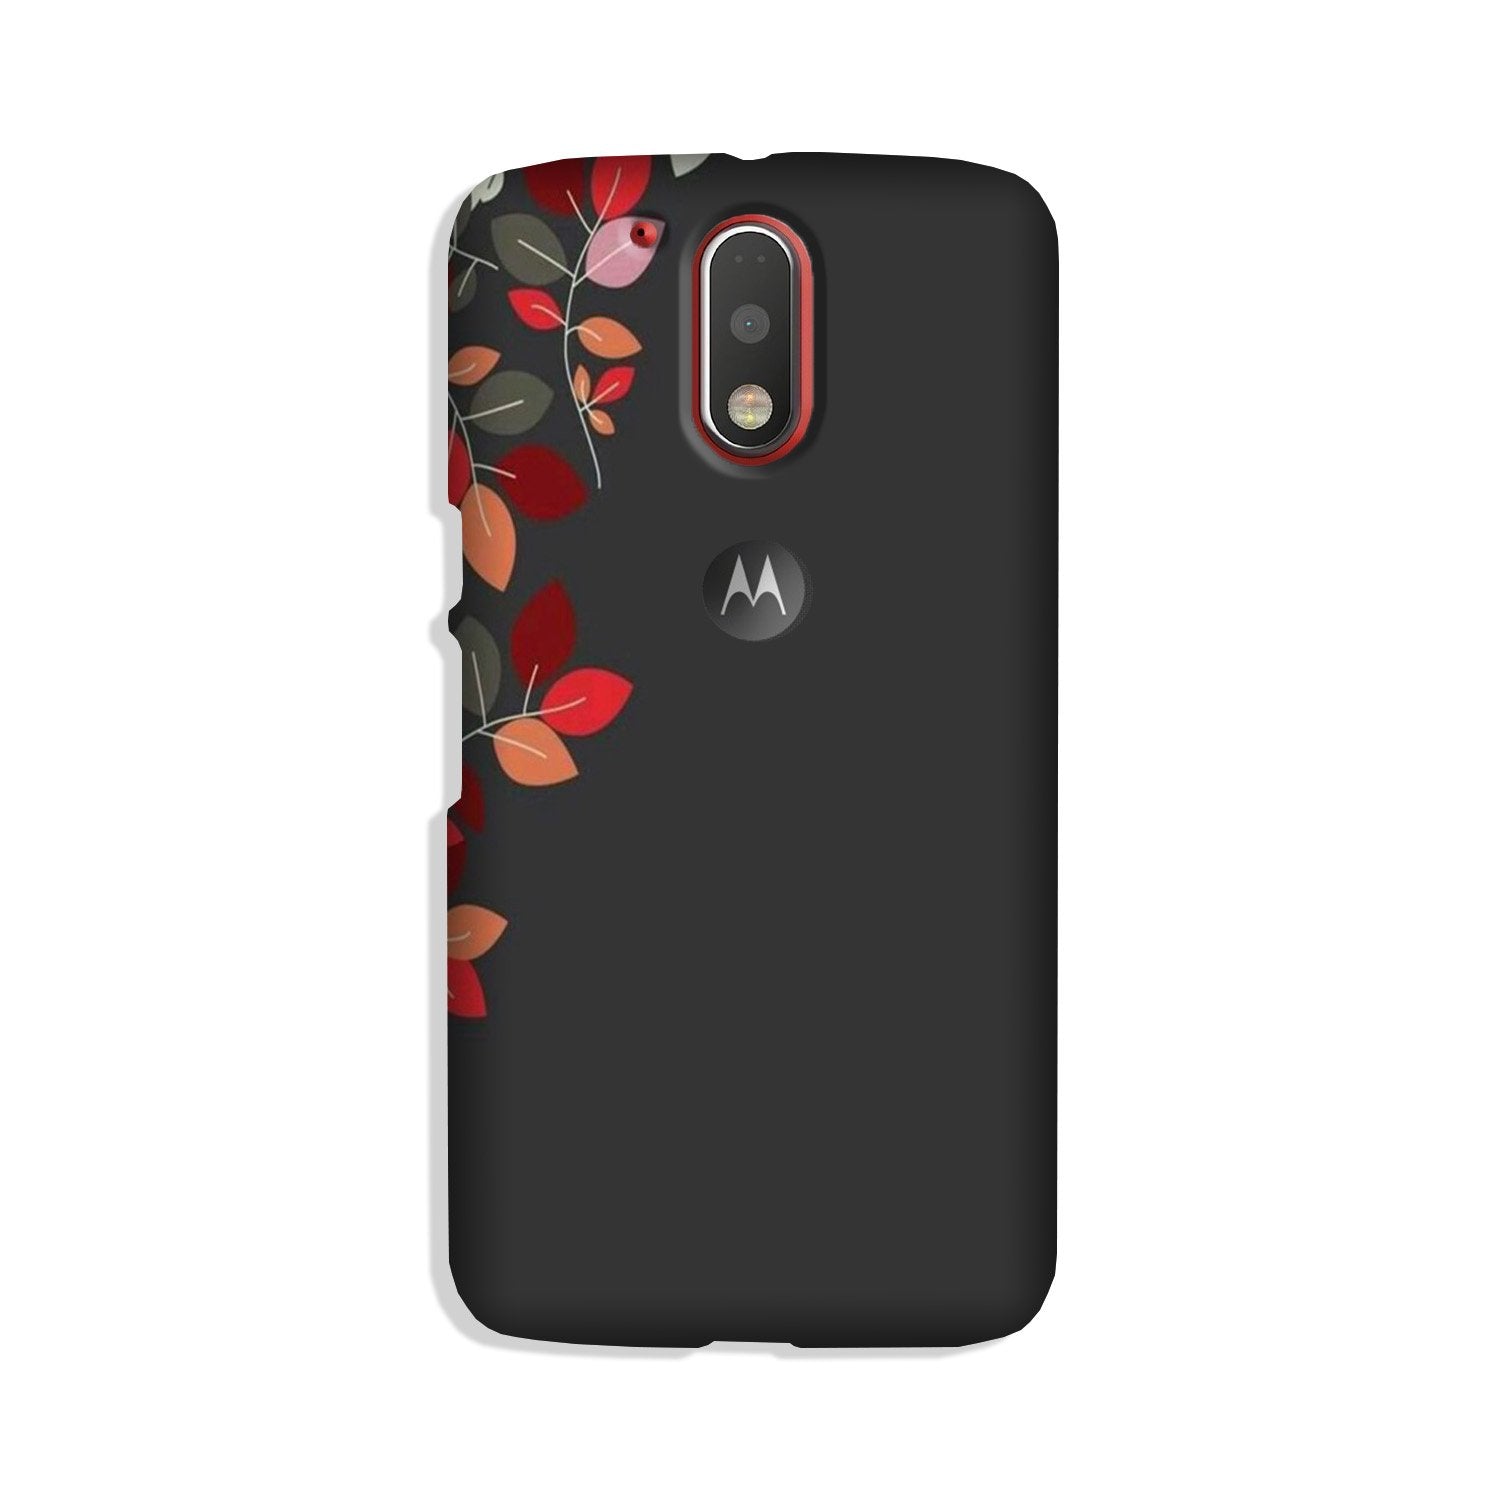 Grey Background Case for Moto G4 Plus